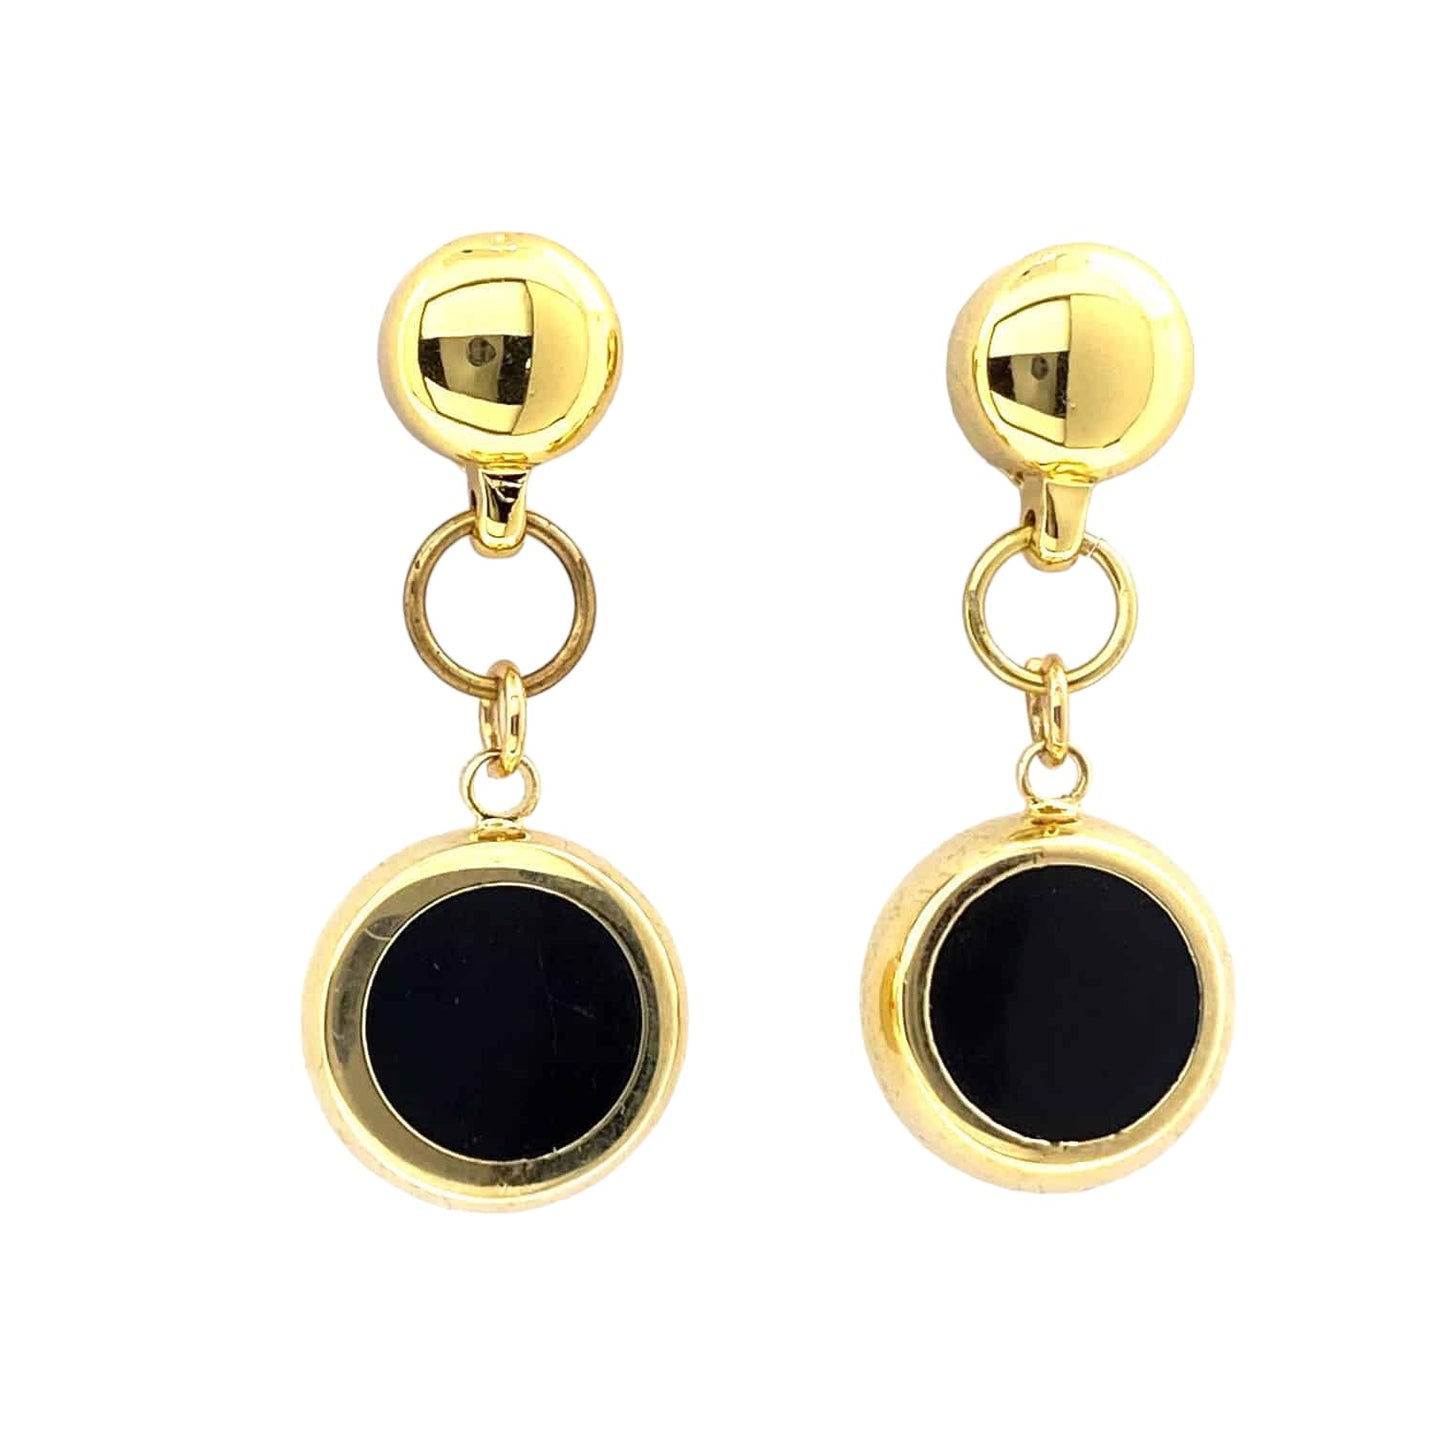 TI-GO Gold and black ring earring. Detachable earrings for a truly hypoallergenic jewellery on a white background